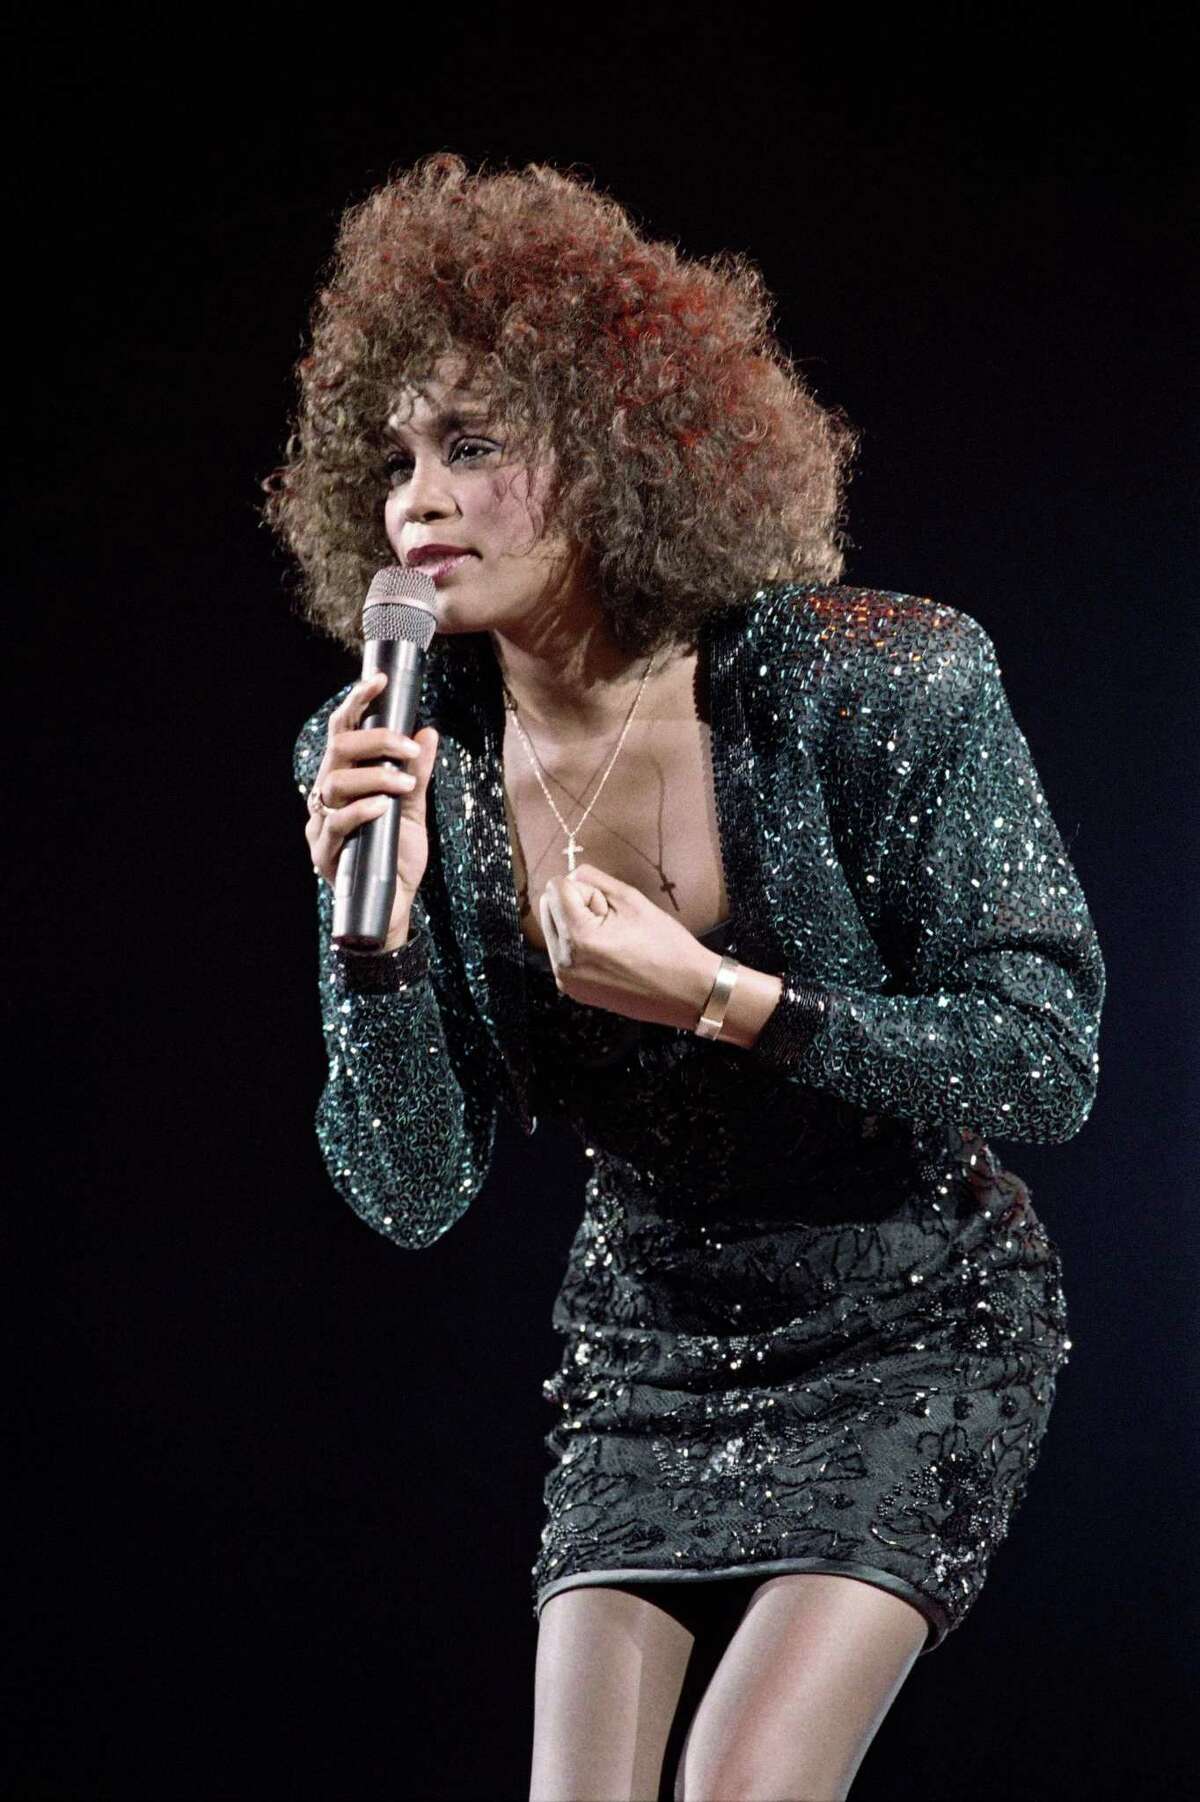 (FILES) A file picture taken on May 18, 1988 in Paris shows US singer Whitney Houston performing at the POPB (Bercy hall). Grammy-winning pop legend and actress Whitney Houston, 48, was found dead on February 11, 2012 in a Beverly Hills hotel, police said. AFP PHOTO BERTRAND GUAY (Photo credit should read BERTRAND GUAY/AFP/Getty Images)